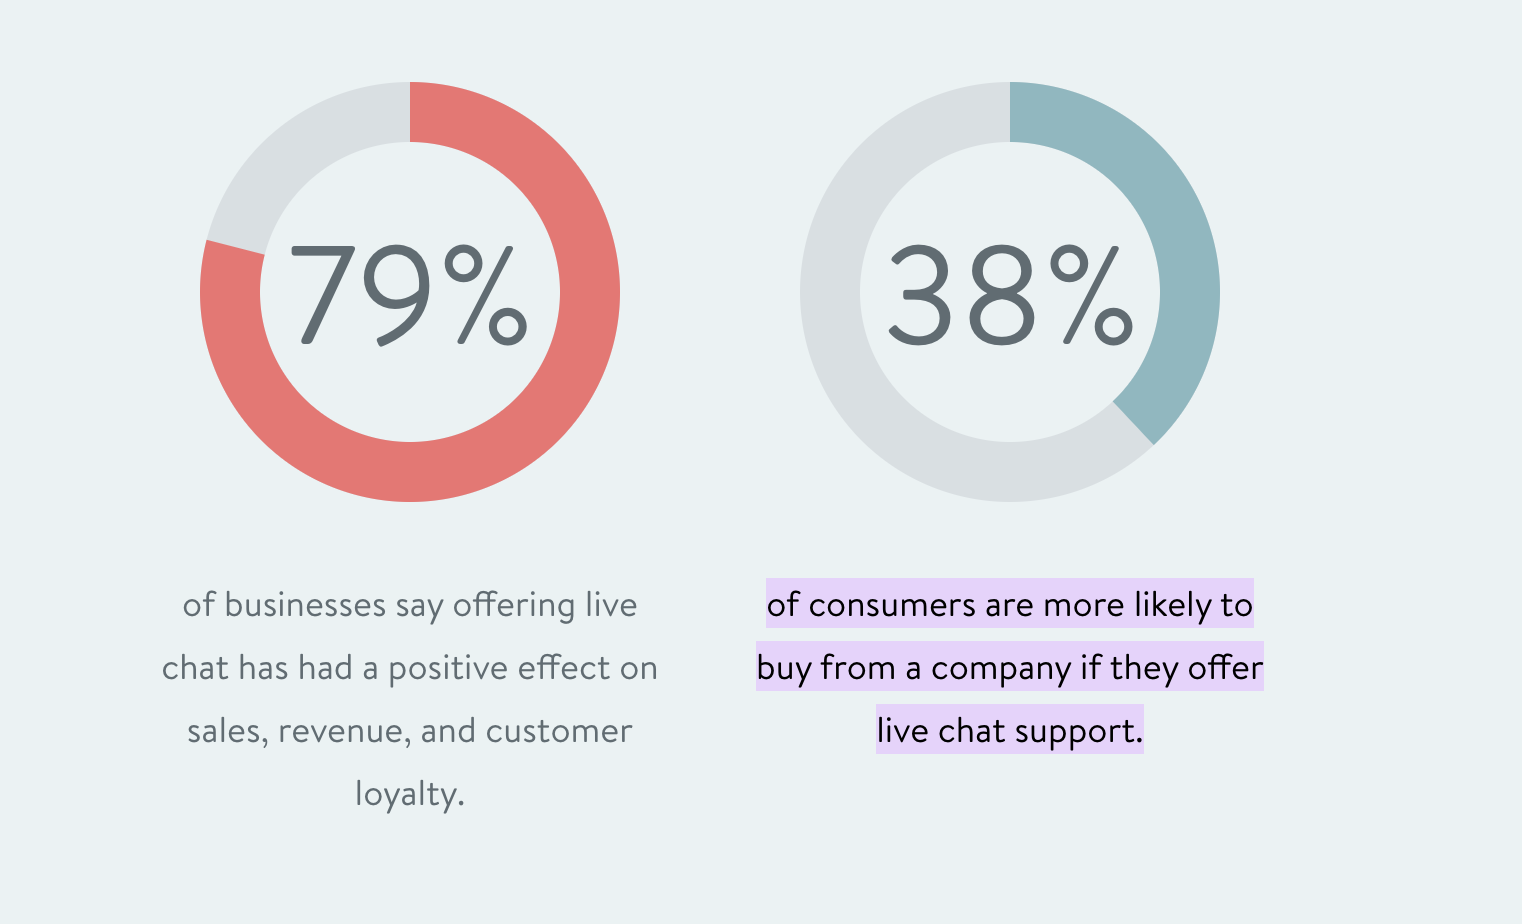 A pie chart showing the influence of live chat on business revenue and customer loyalty.